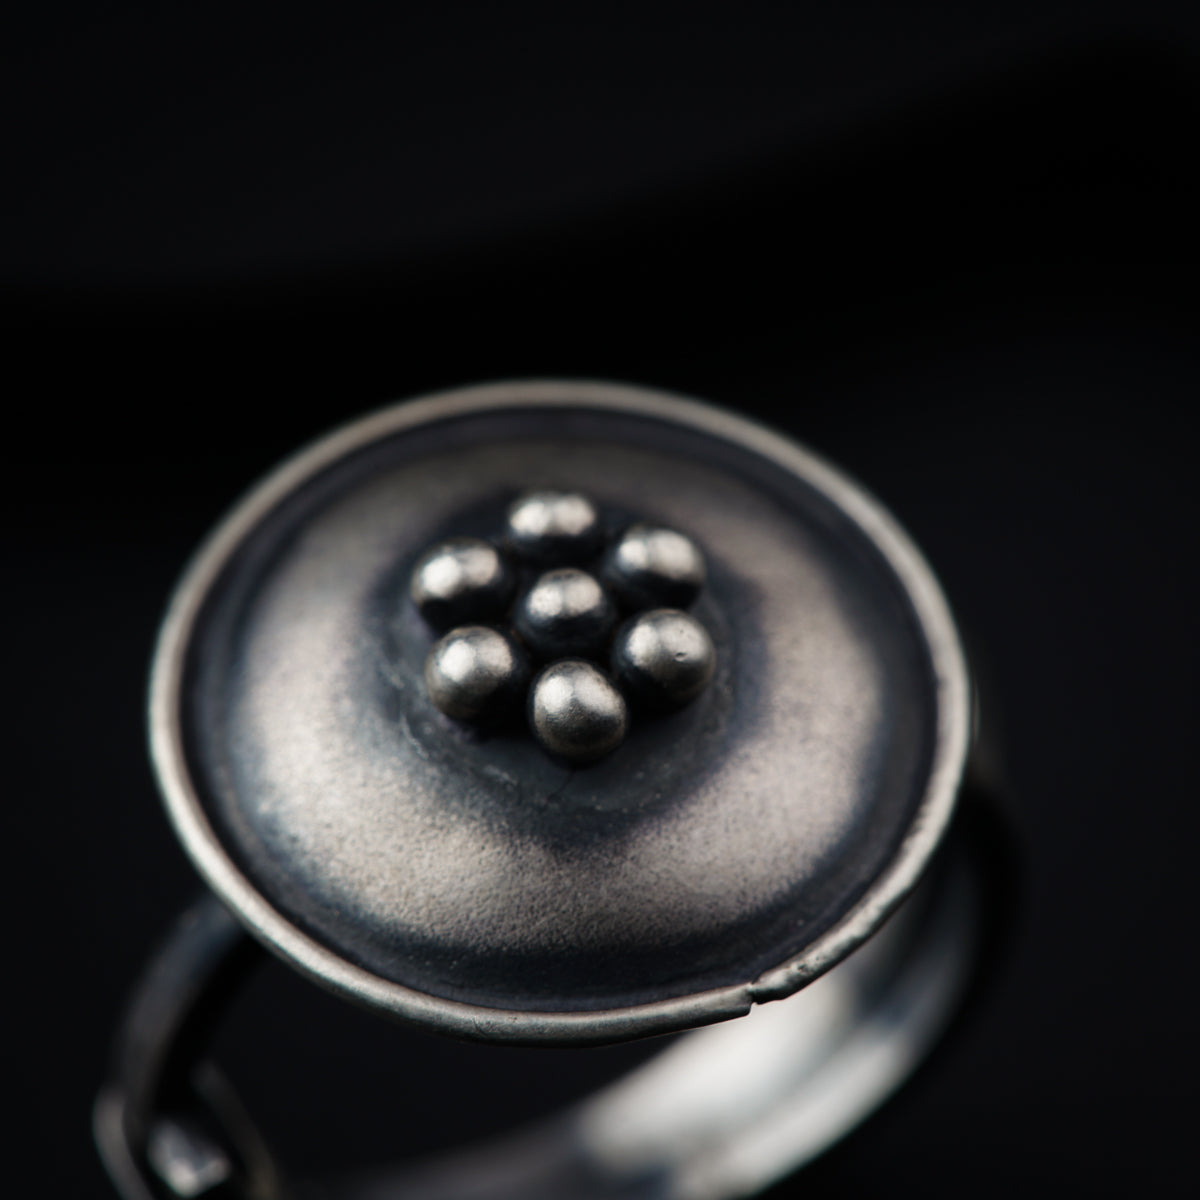 a close up of a button on a ring